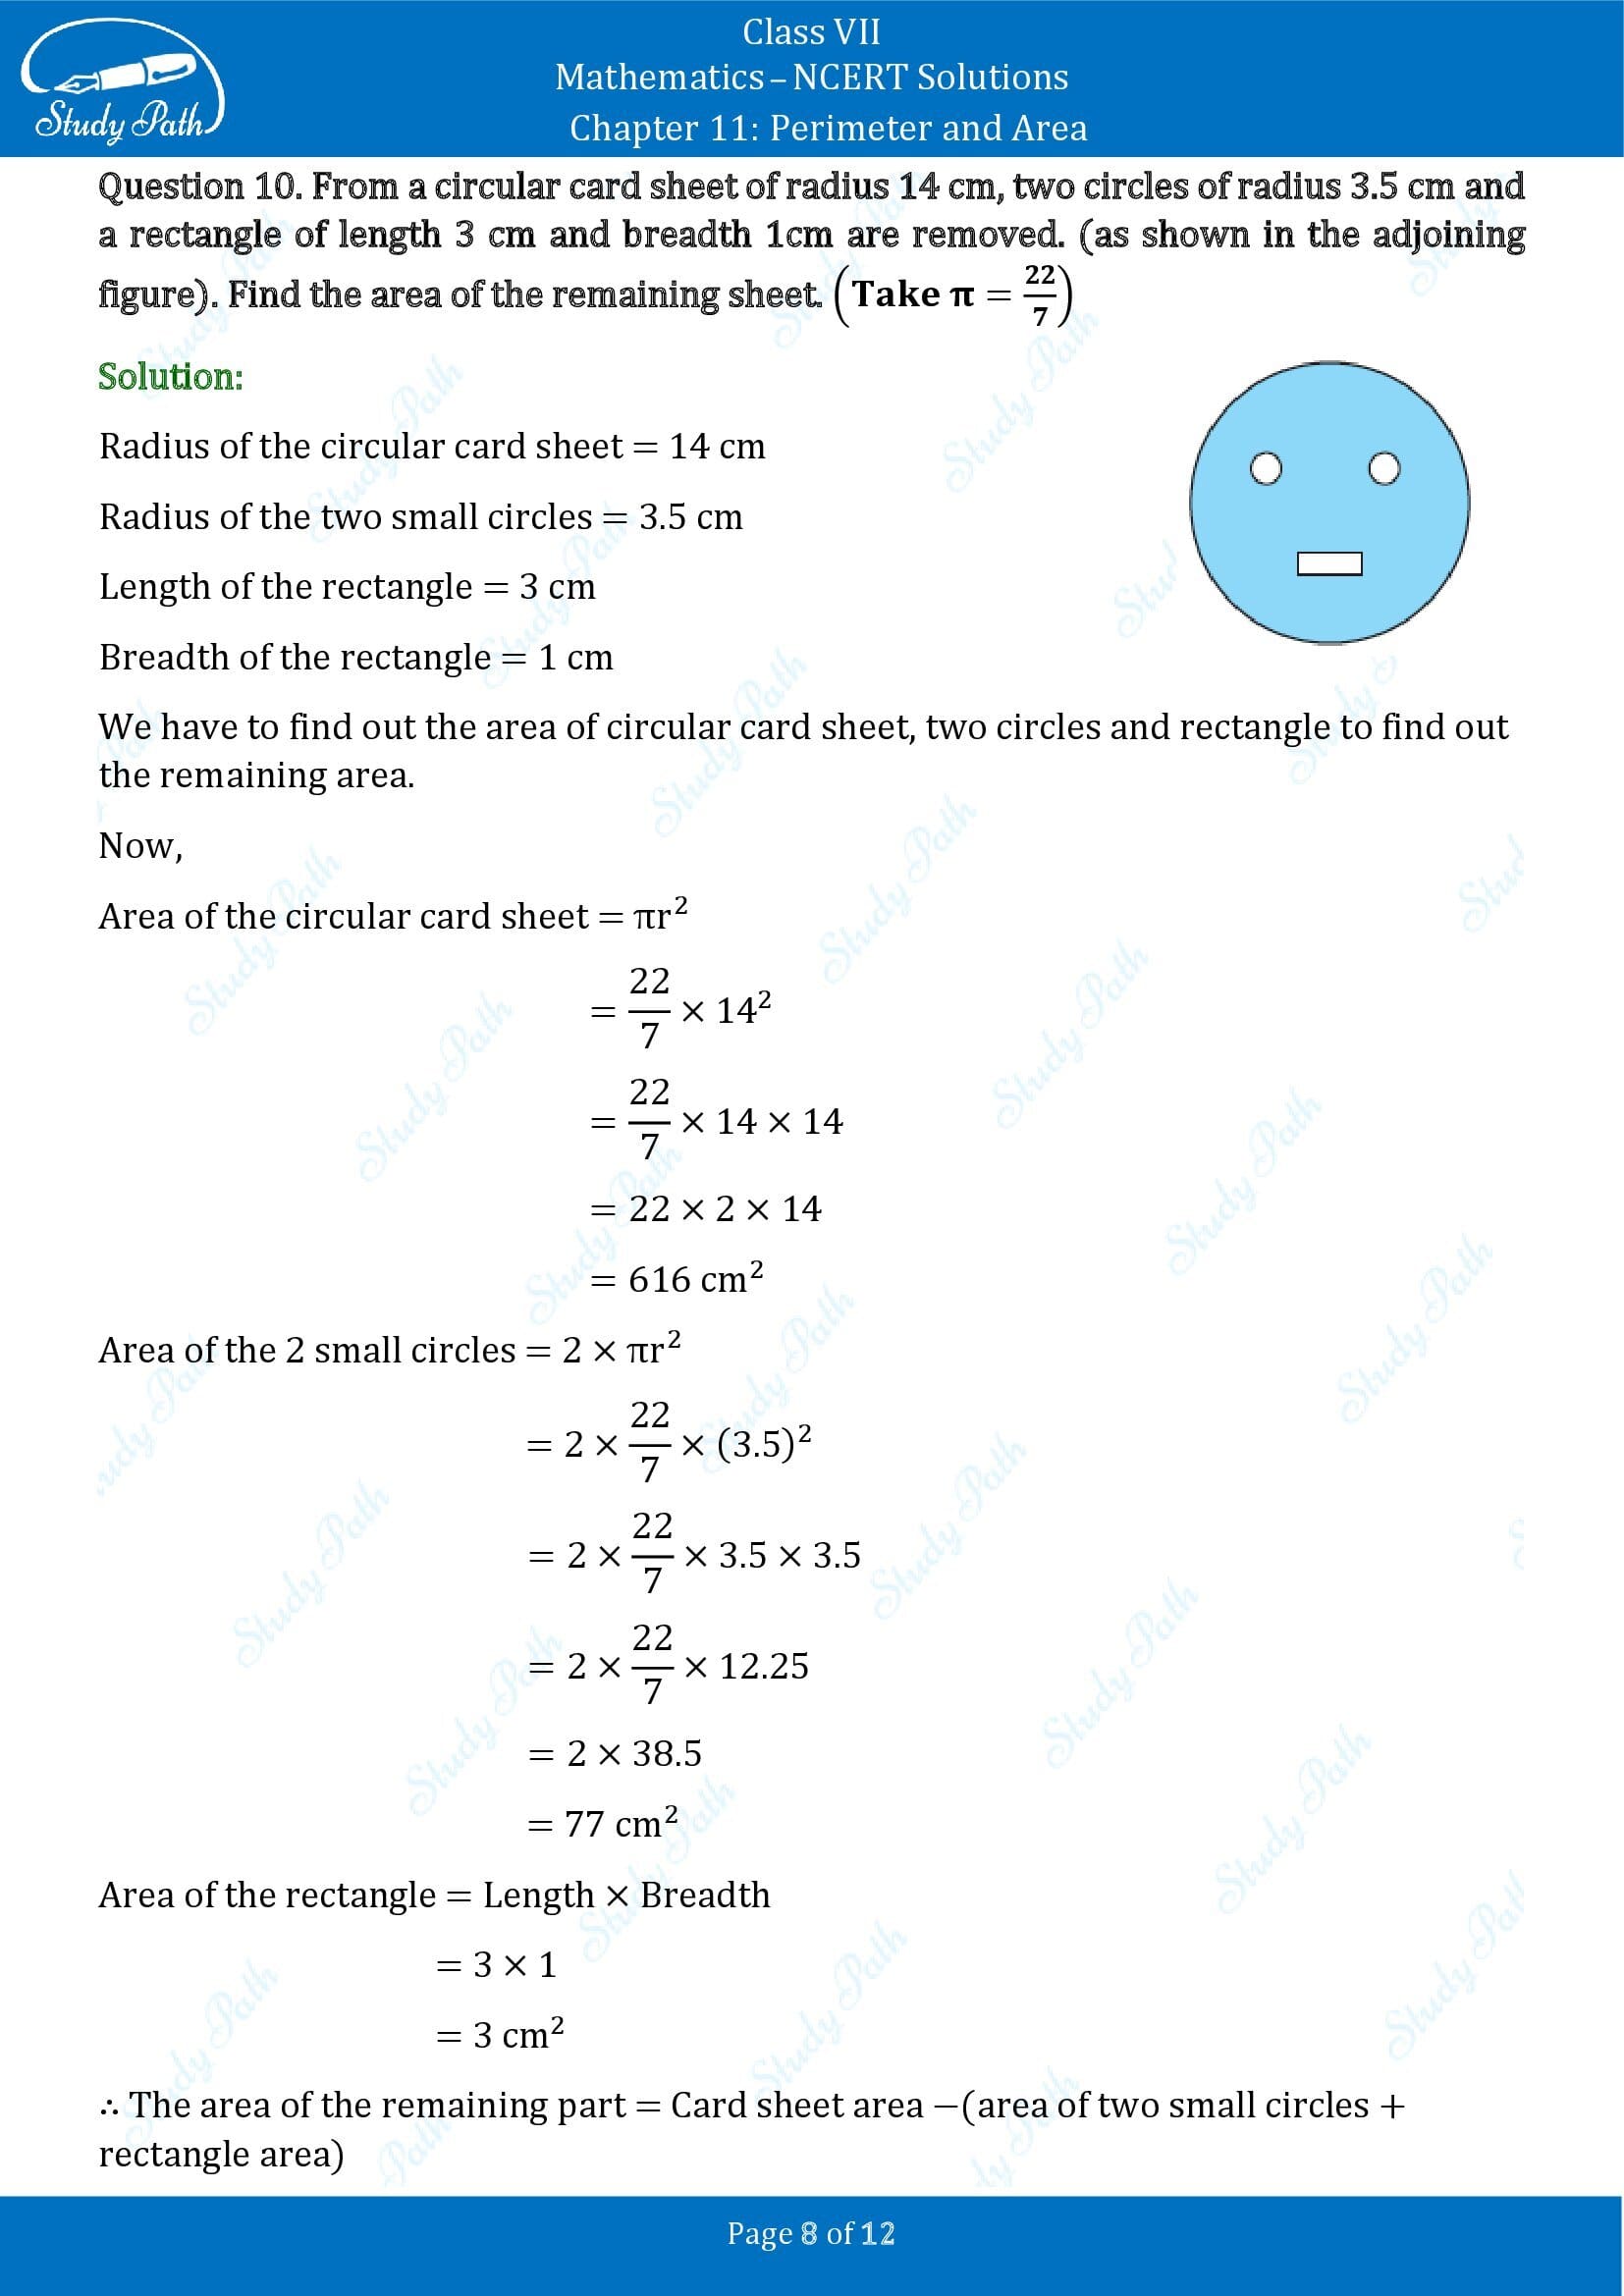 NCERT Solutions for Class 7 Maths Chapter 11 Perimeter and Area Exercise 11.3 00008